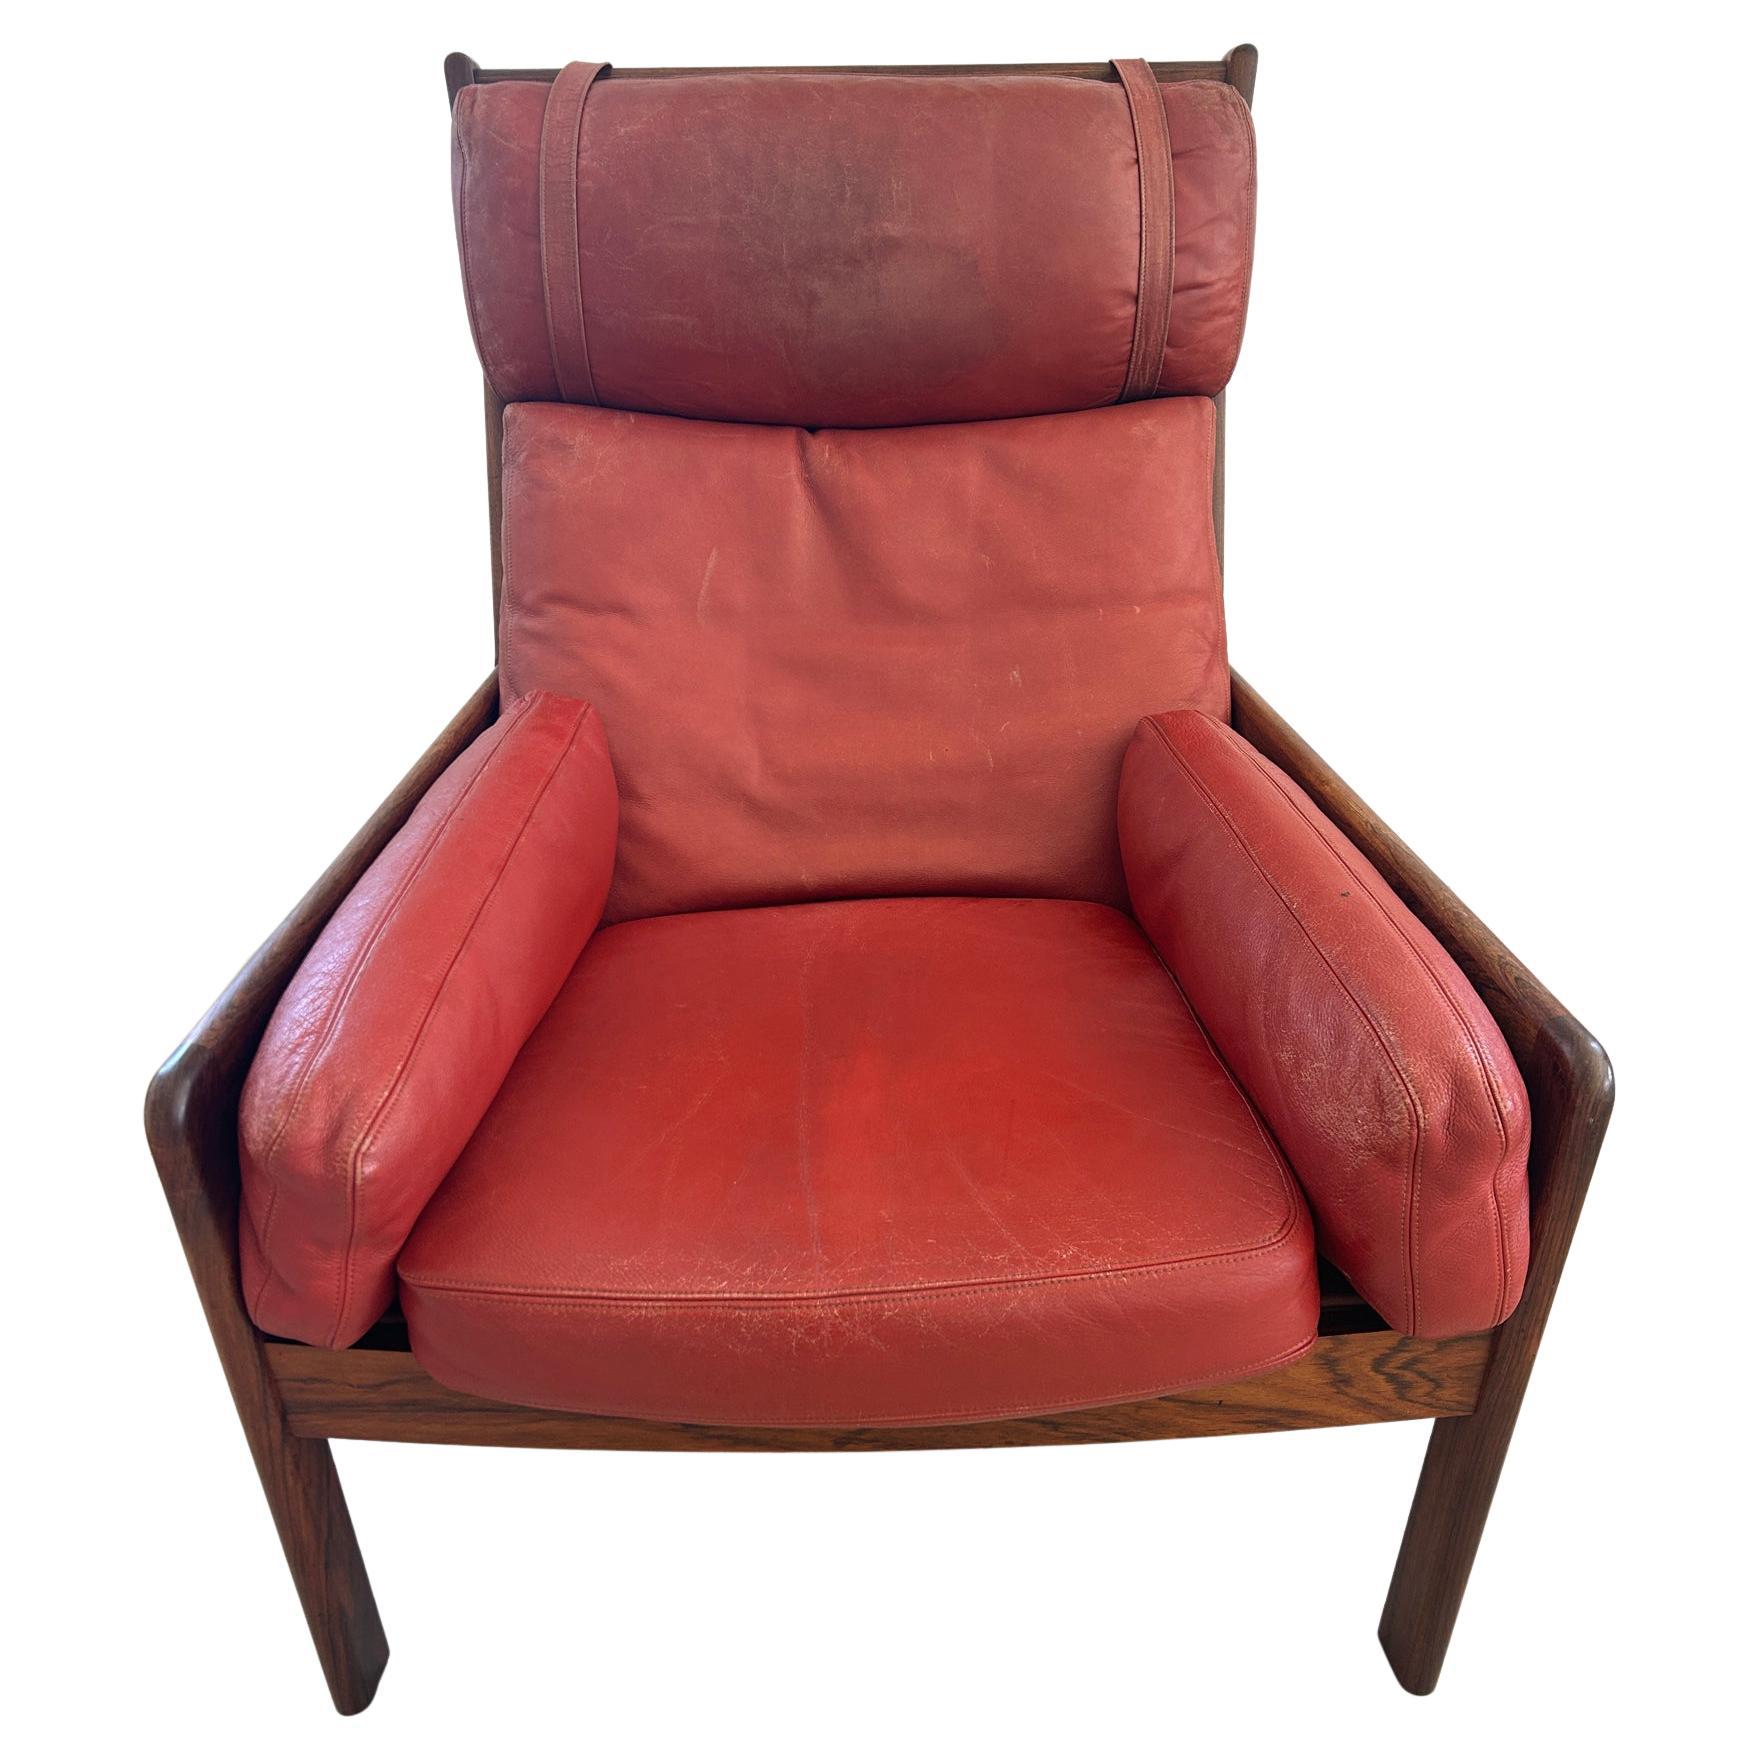 Mid-Century Modern Midcentury Scandinavian Modern Solid Rosewood Red Leather Lounge Chair For Sale